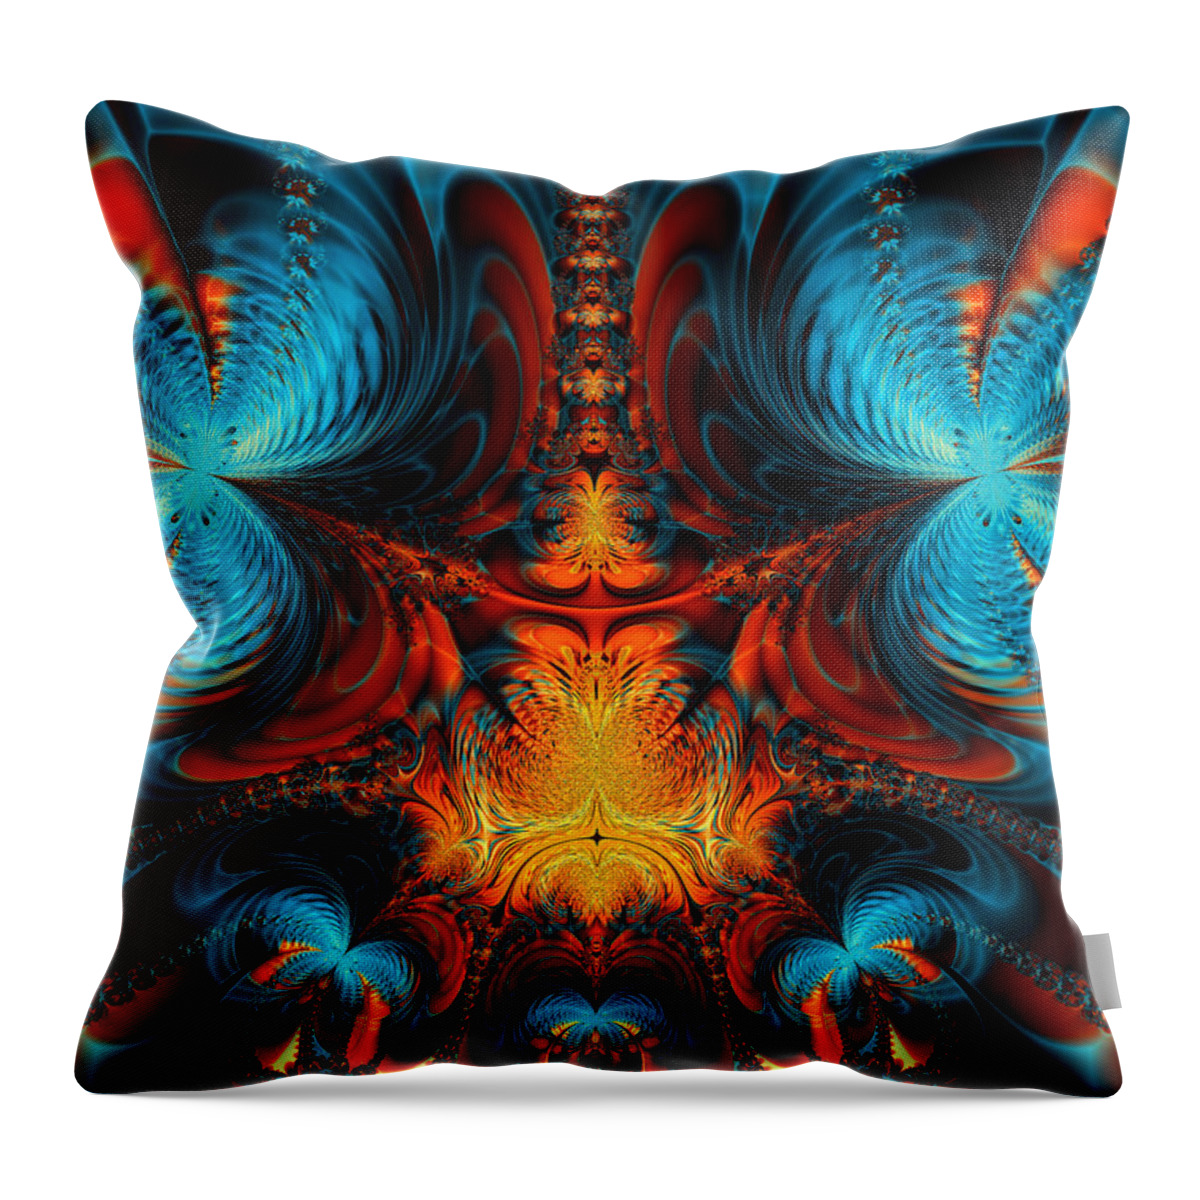 Abstract Throw Pillow featuring the digital art Butterfly Plasma by Ian Mitchell